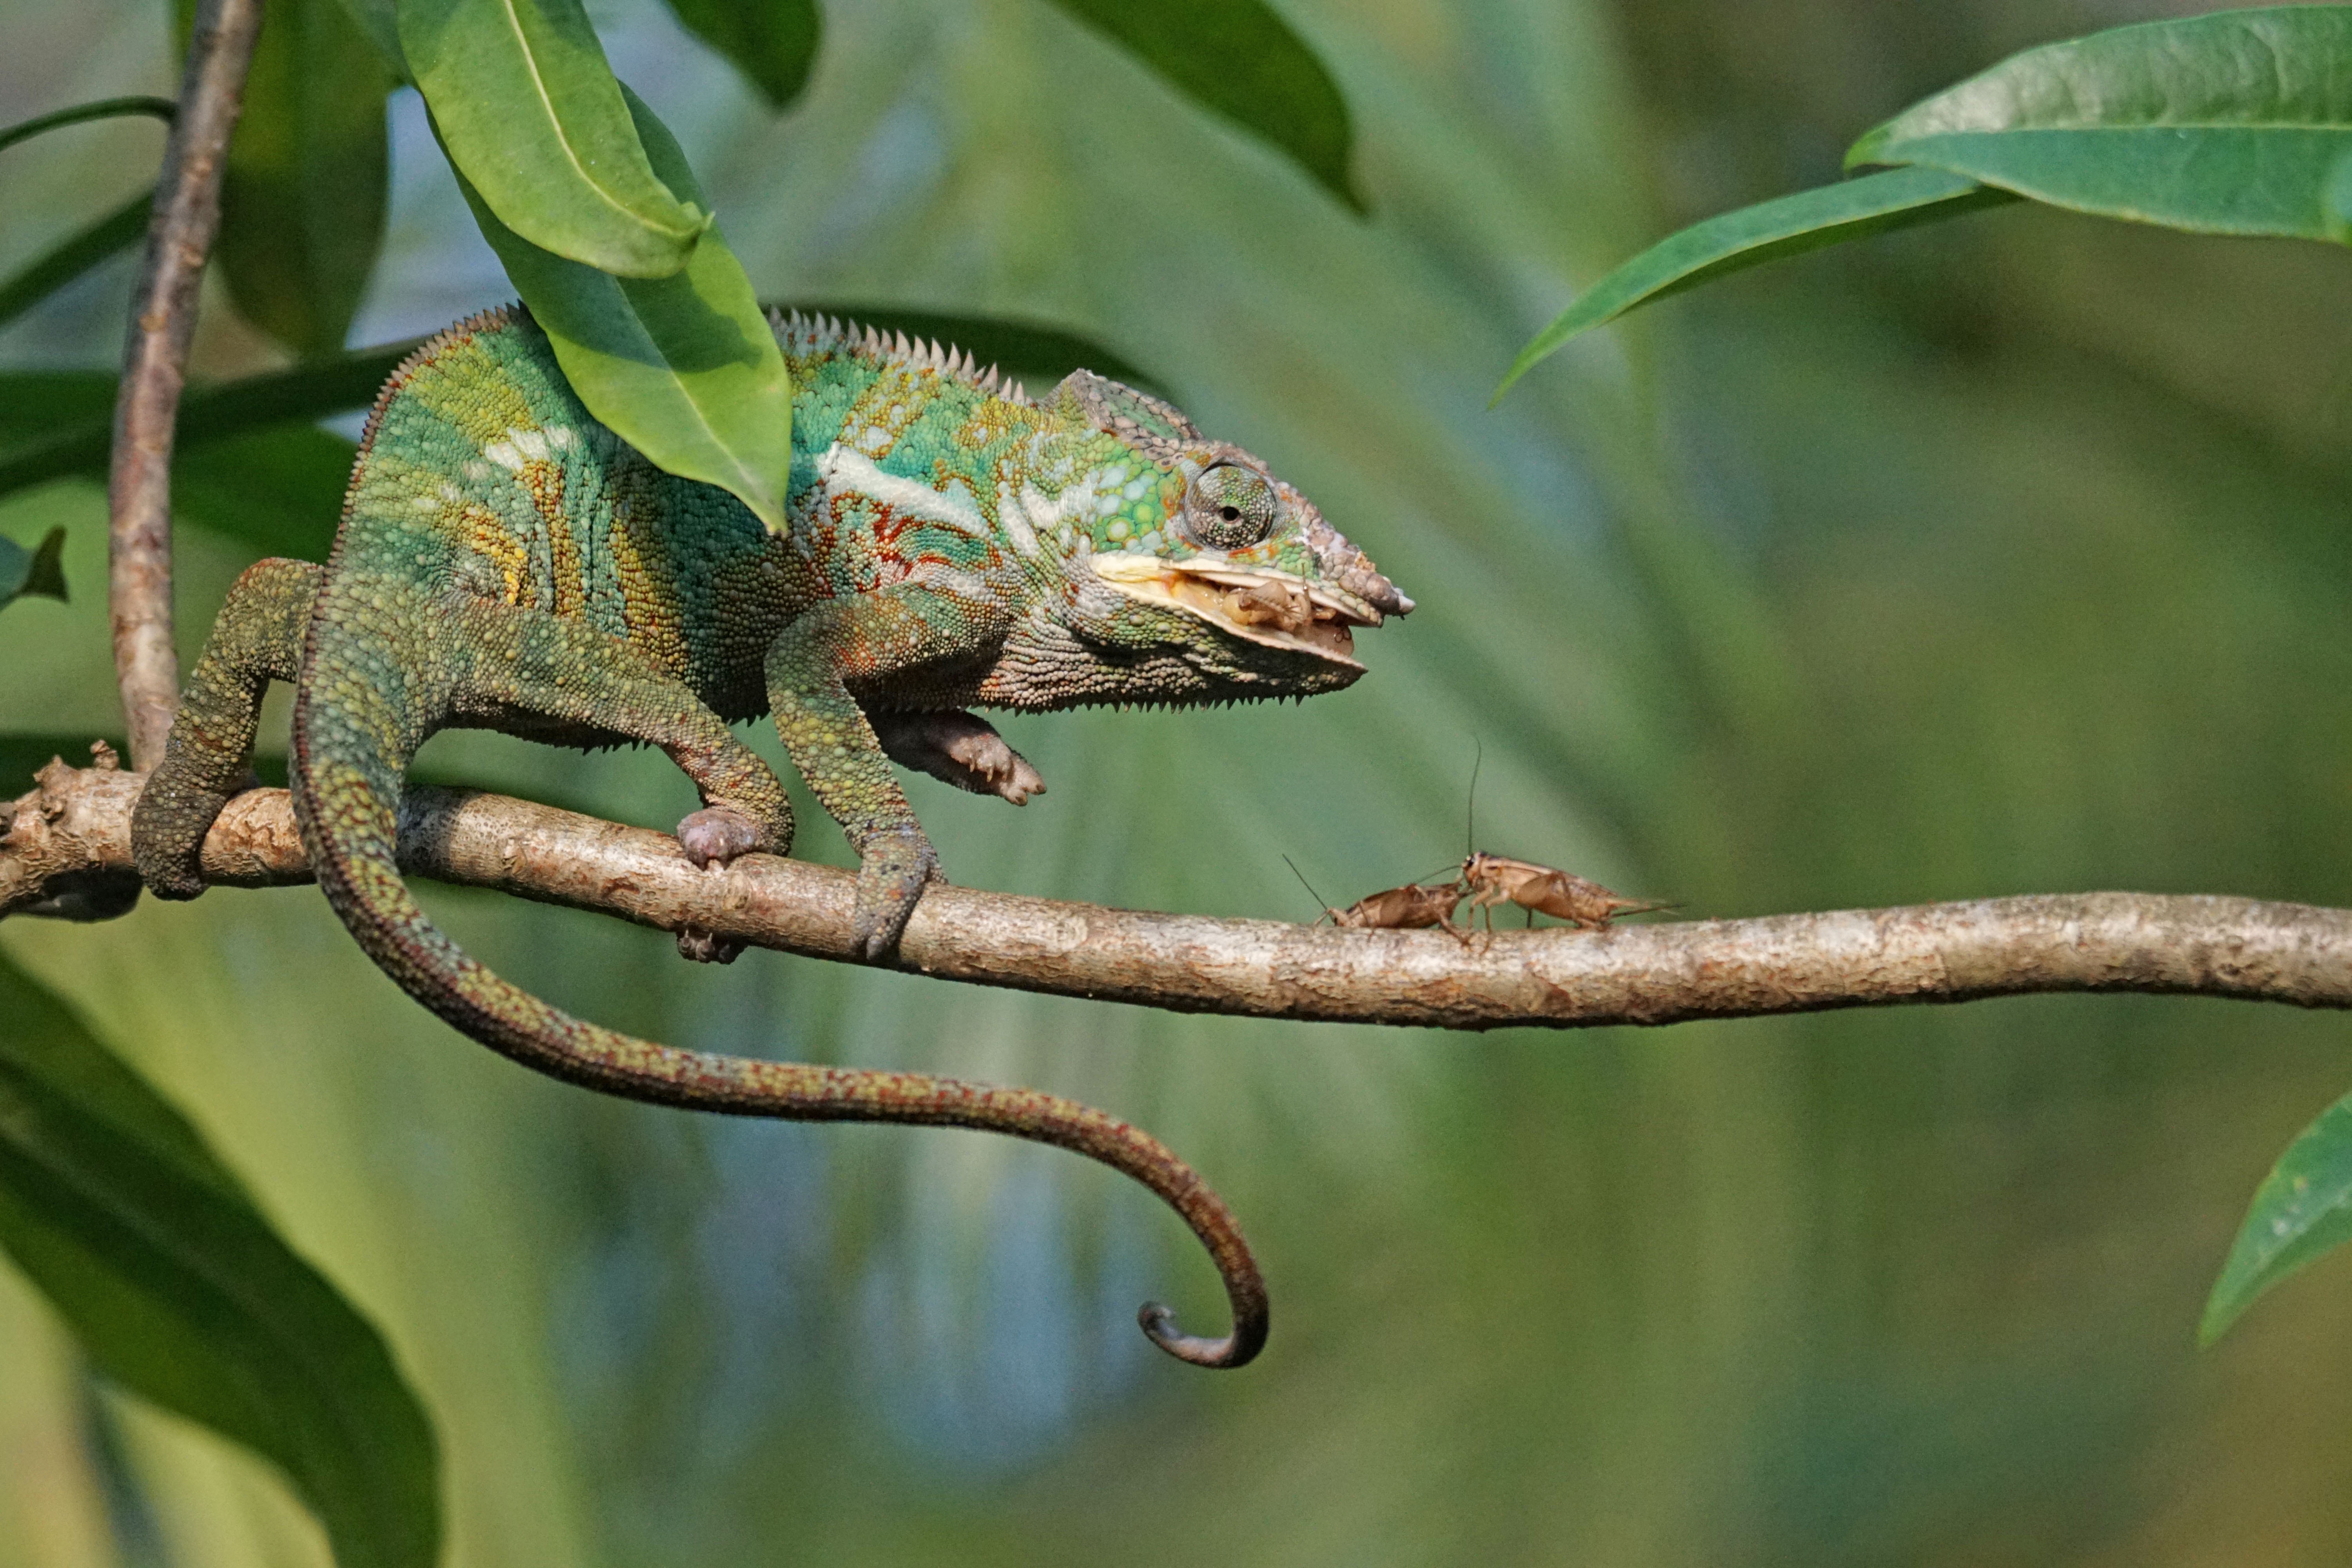 Panther Chameleon, Food, Eat, Grille, one animal, reptile